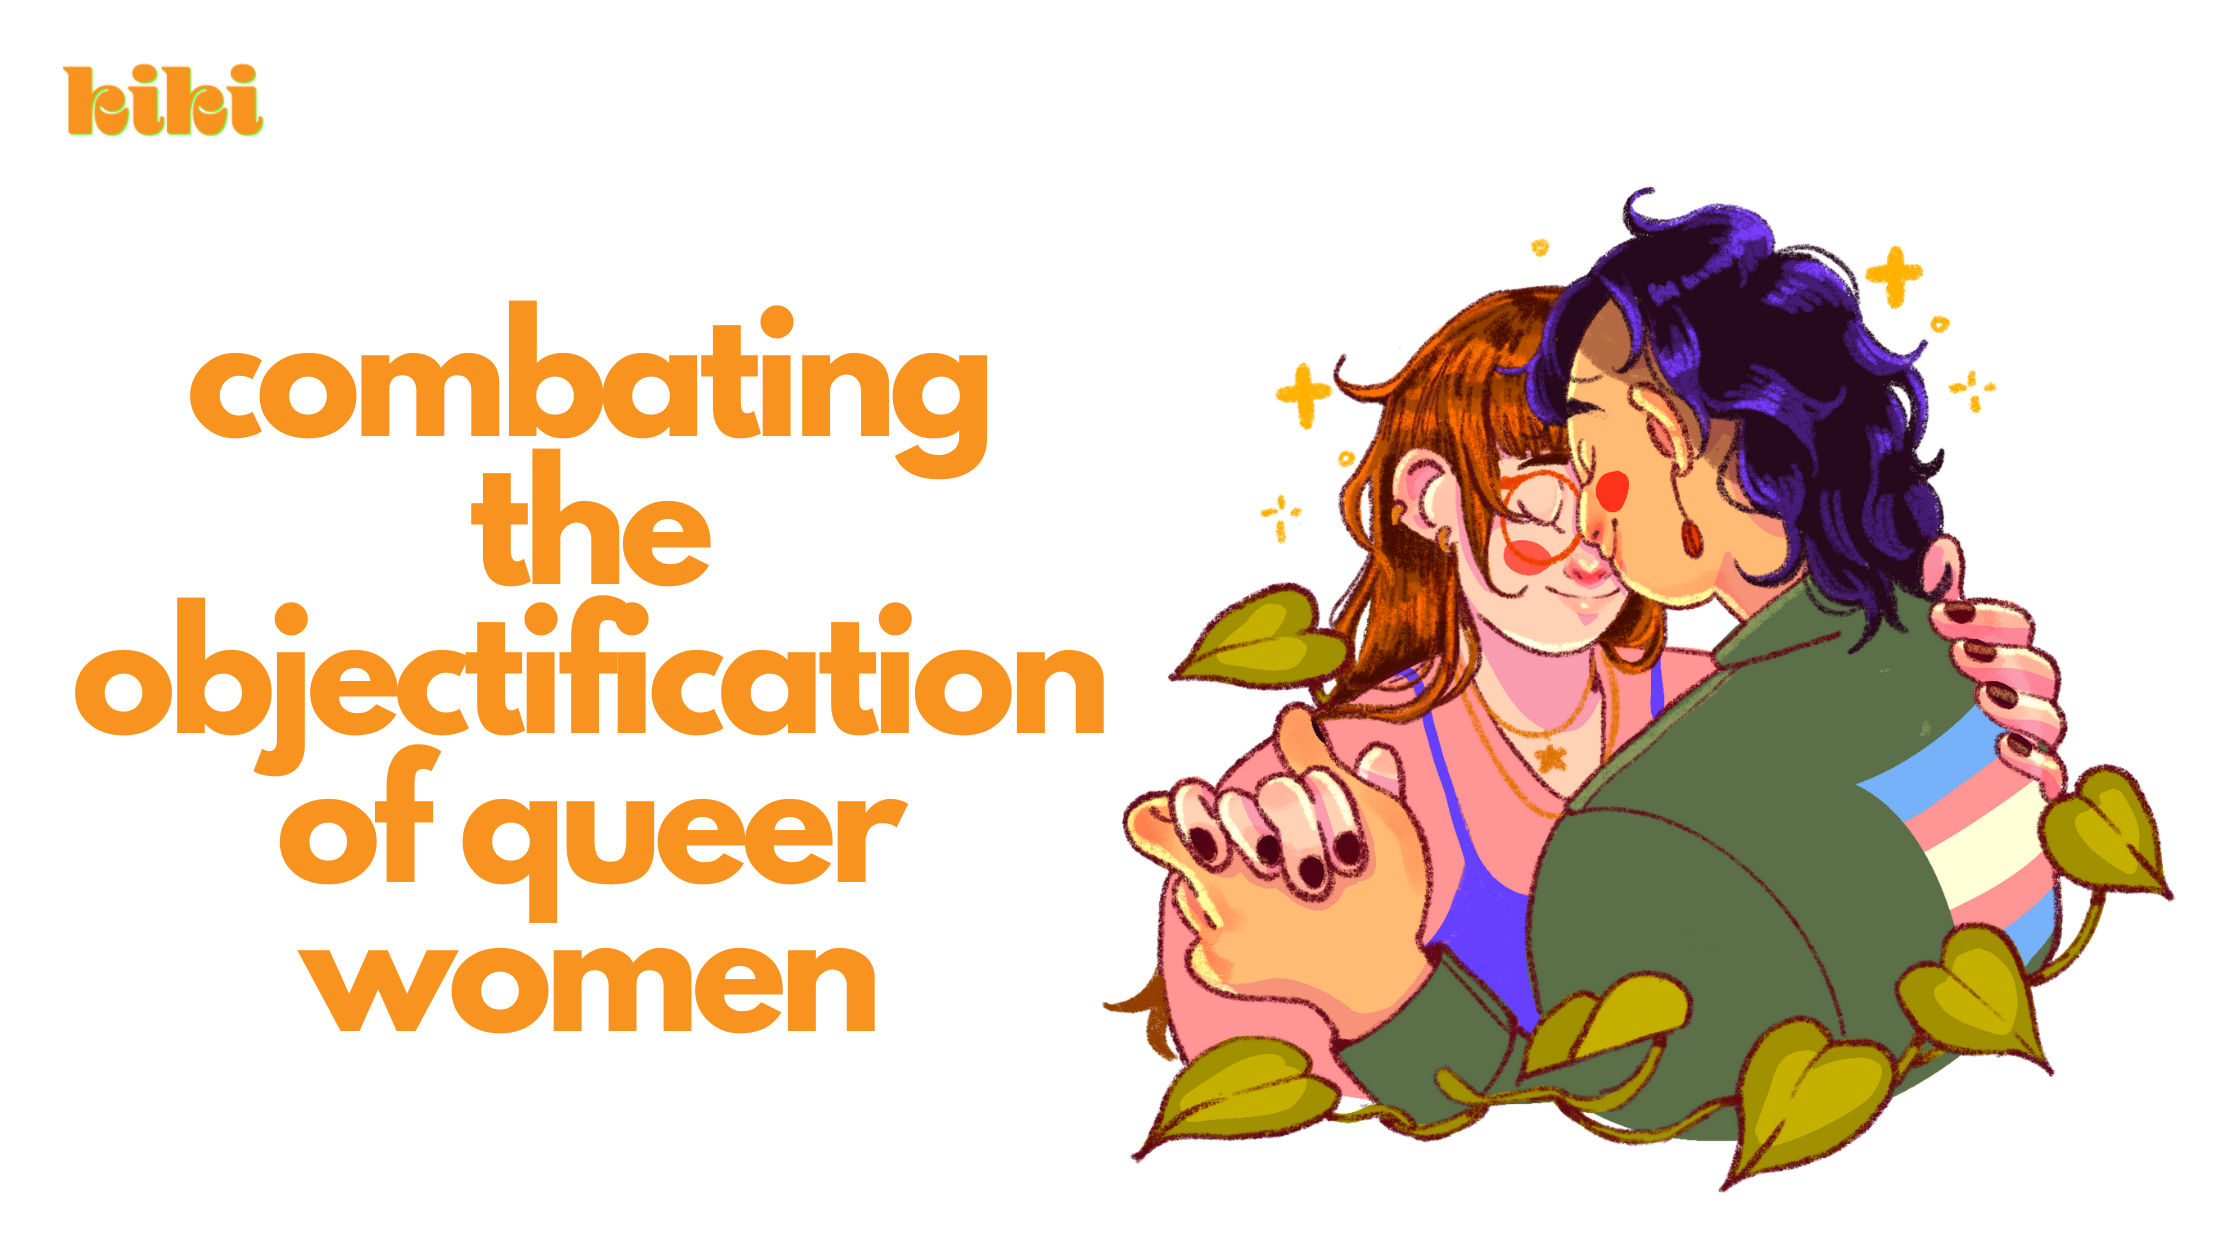 text reads: combating the objectification of queer woman. Illustration of two women embracing, one of whom has a transgender pride flag on her jacket.